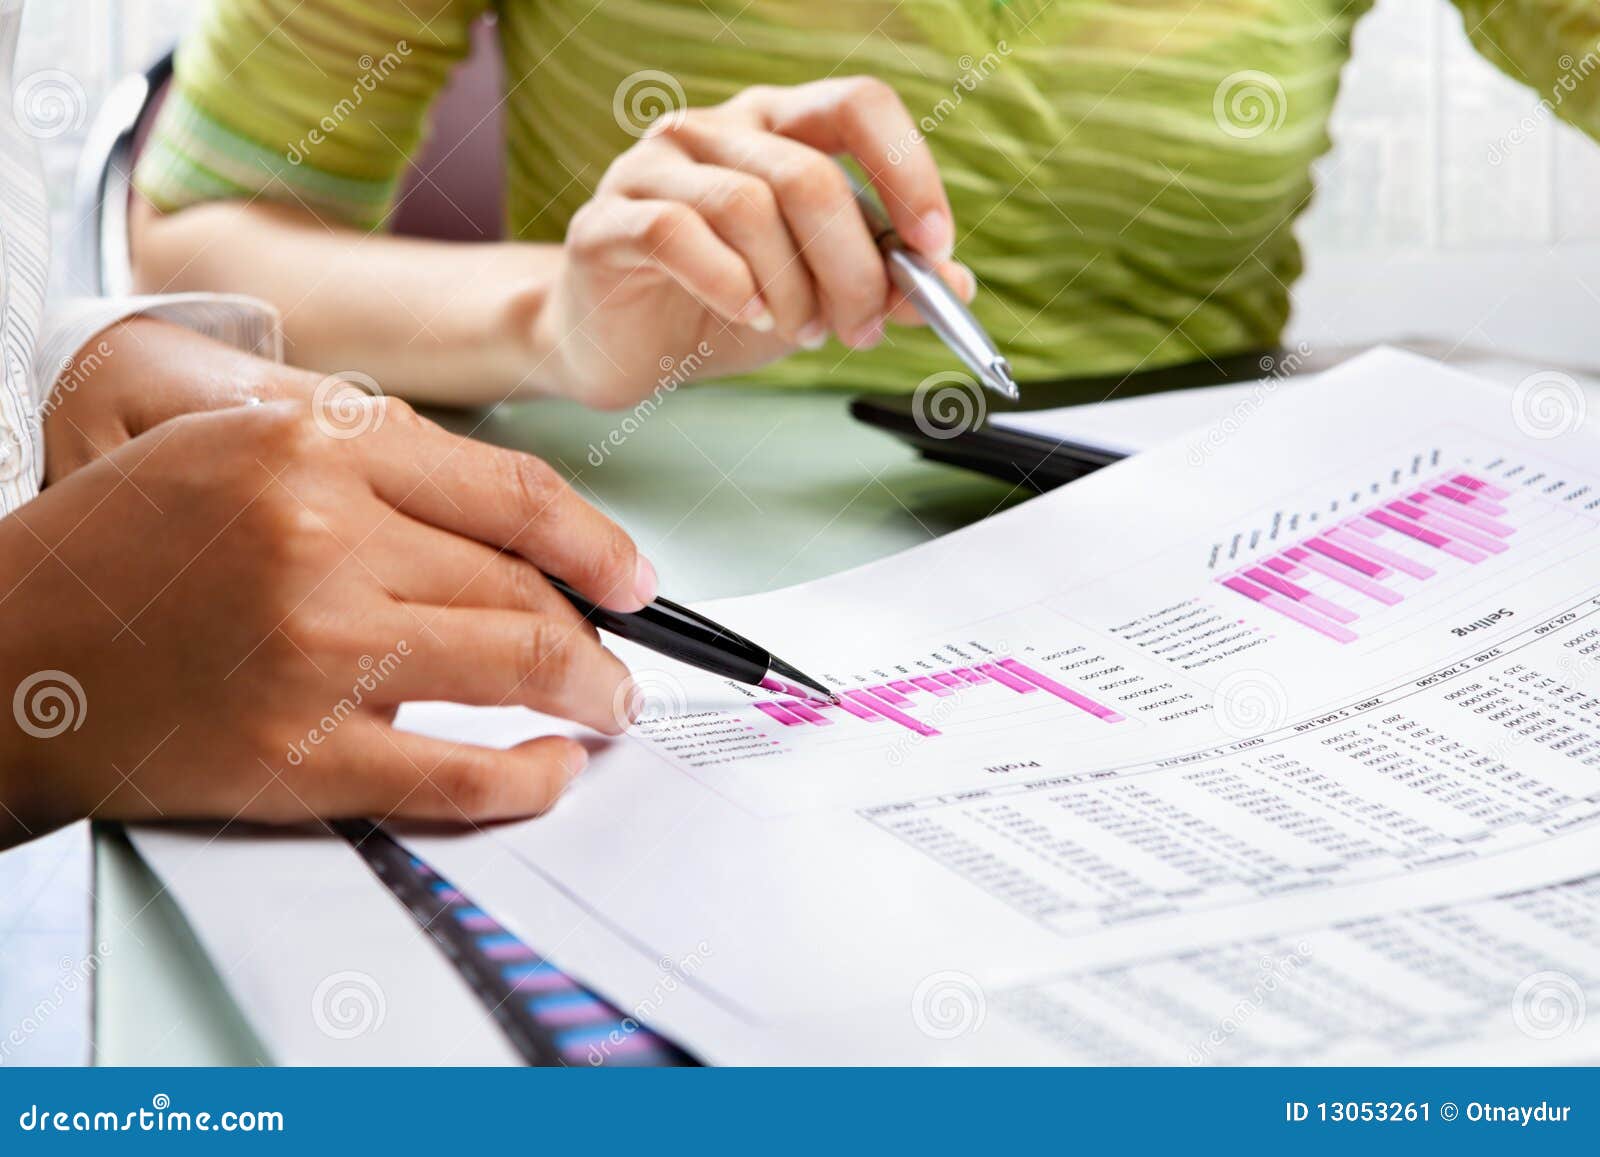 two woman working on statistic